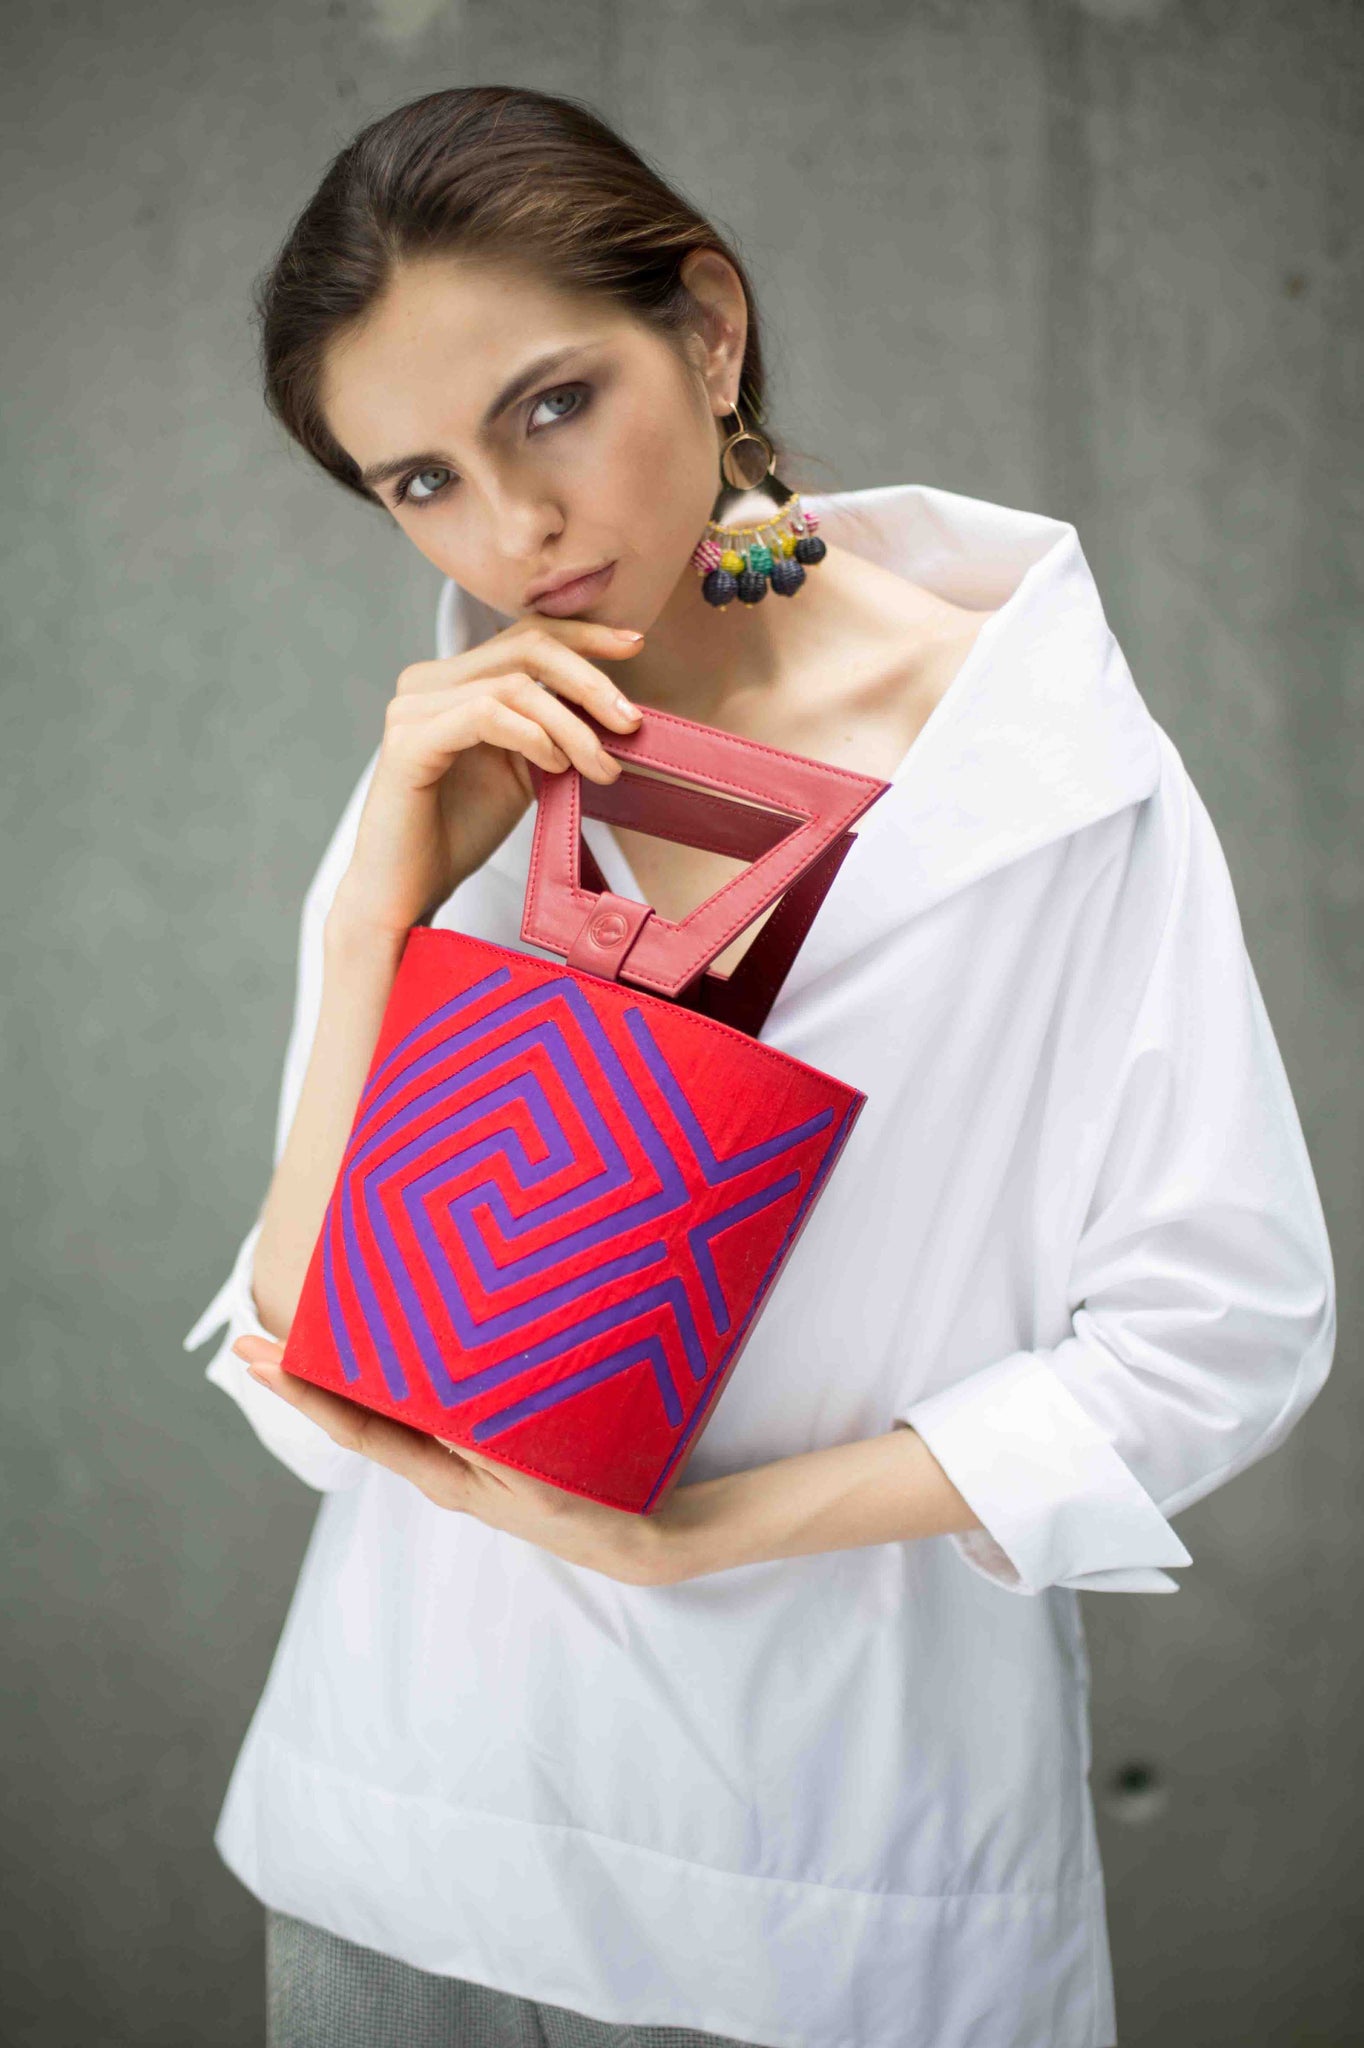 Nabba Tote by Fe Handbags. Handmade in Colombia. Nabba Bag featuring a bright denim Mola made by indigenous people from the Gunadule Tribe. Polished gunmetal gold plated metal fastenings. Detachable leather strap for alternative styling. Color red. 100% calfskin leather.